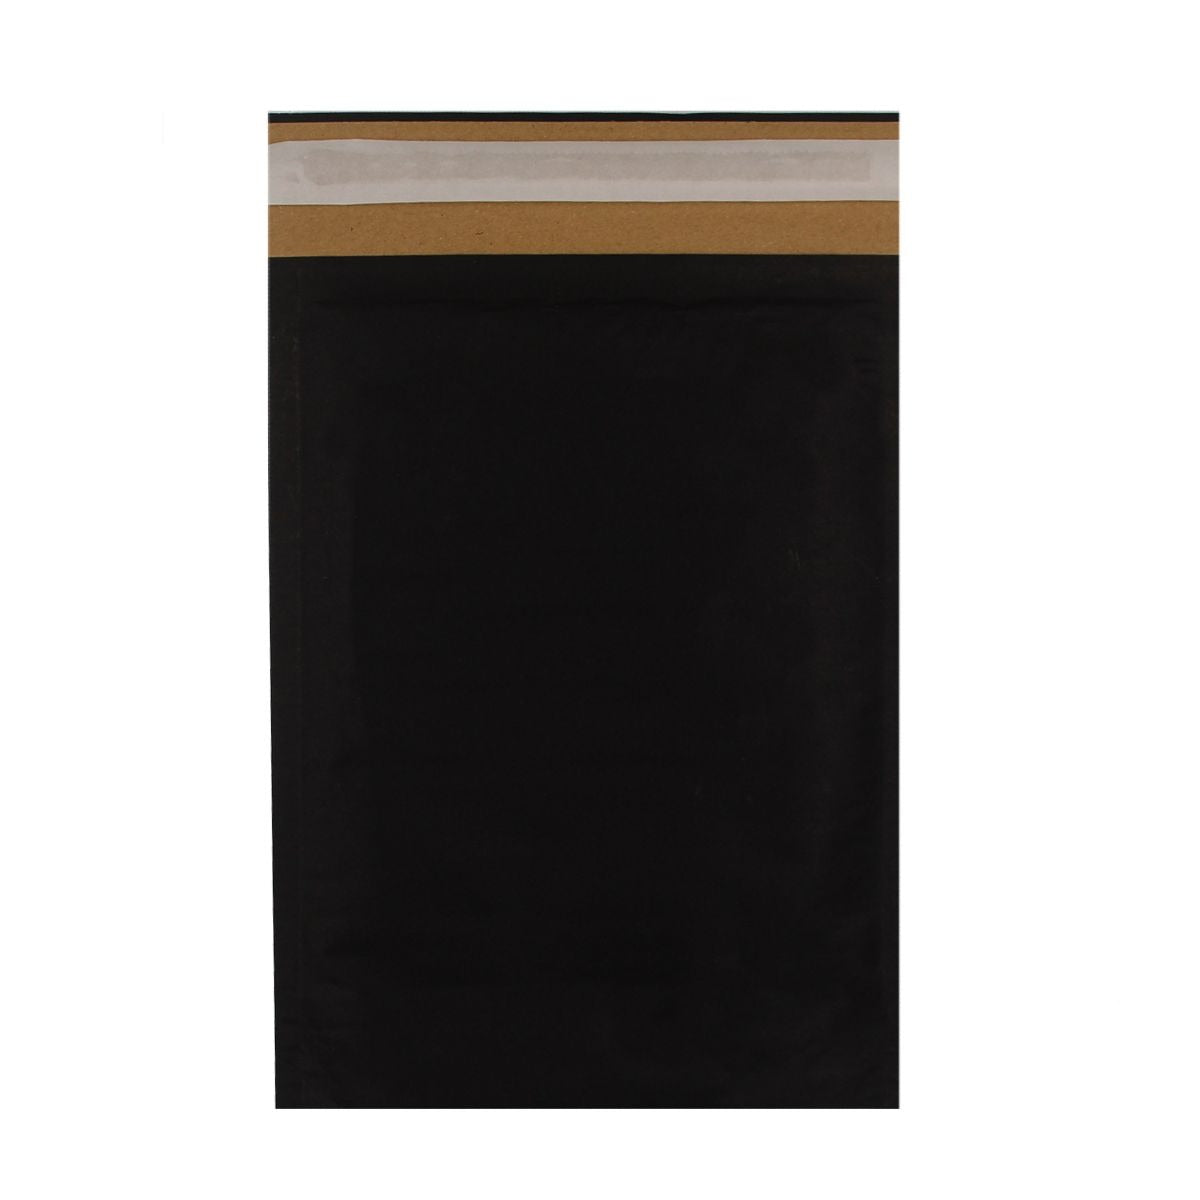 265mm x 180mm Eco Friendly Recyclable Black Padded Envelope [Qty 100] - All Colour Envelopes